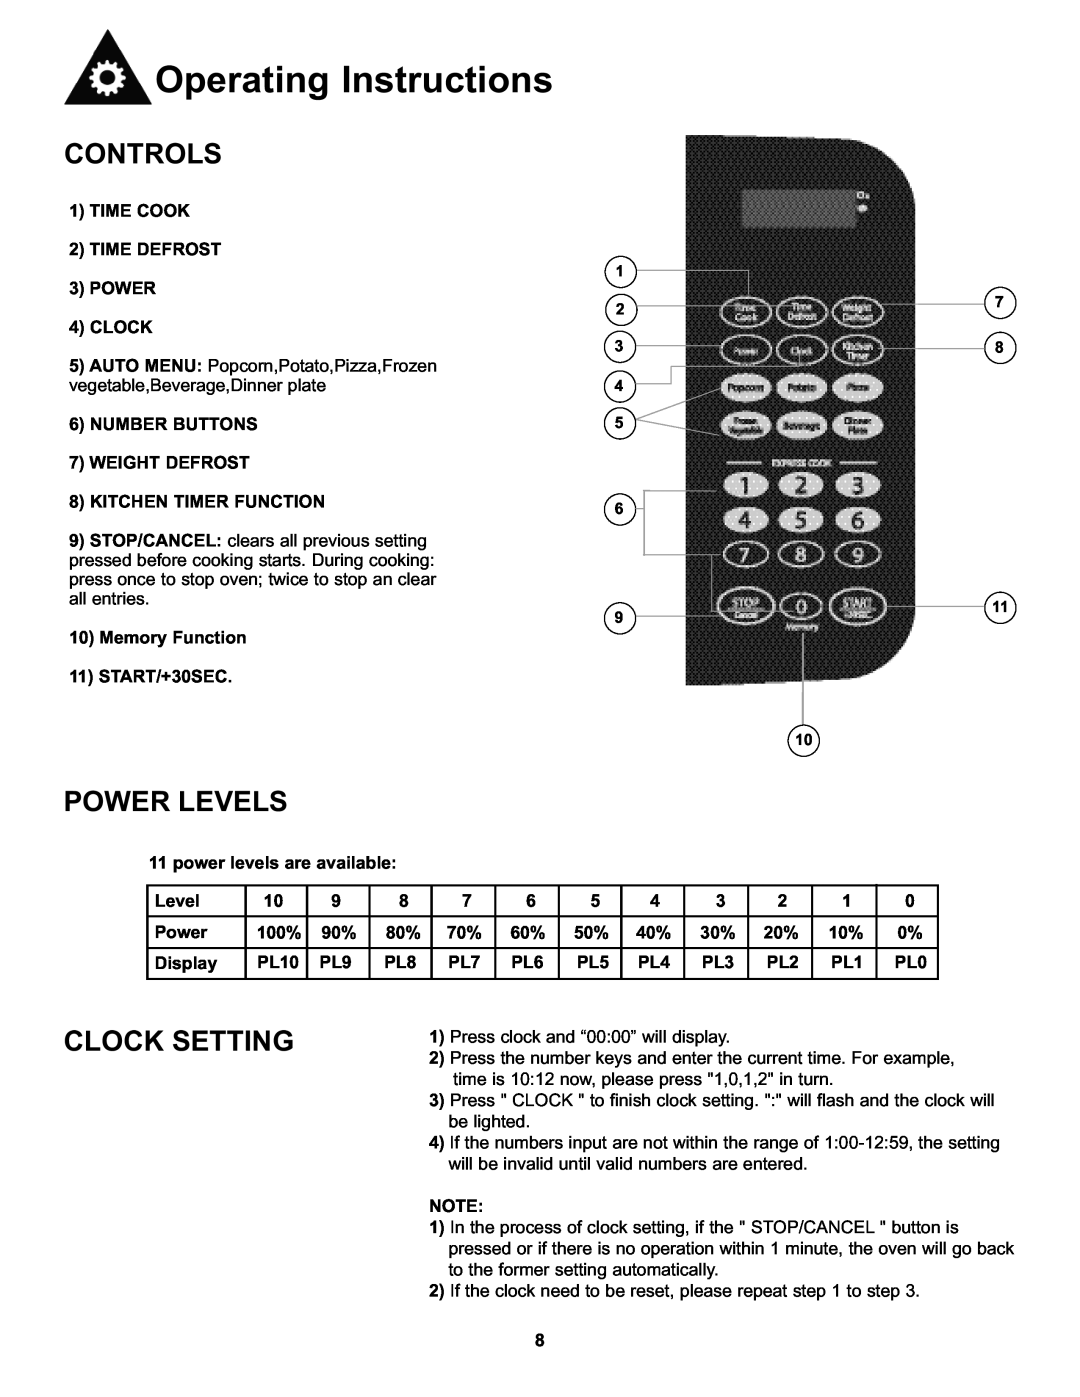 Danby DMW7700WDB Controls, Power Levels, Clock Setting, Operating Instructions, 1TIME COOK 2TIME DEFROST 3POWER 4CLOCK 